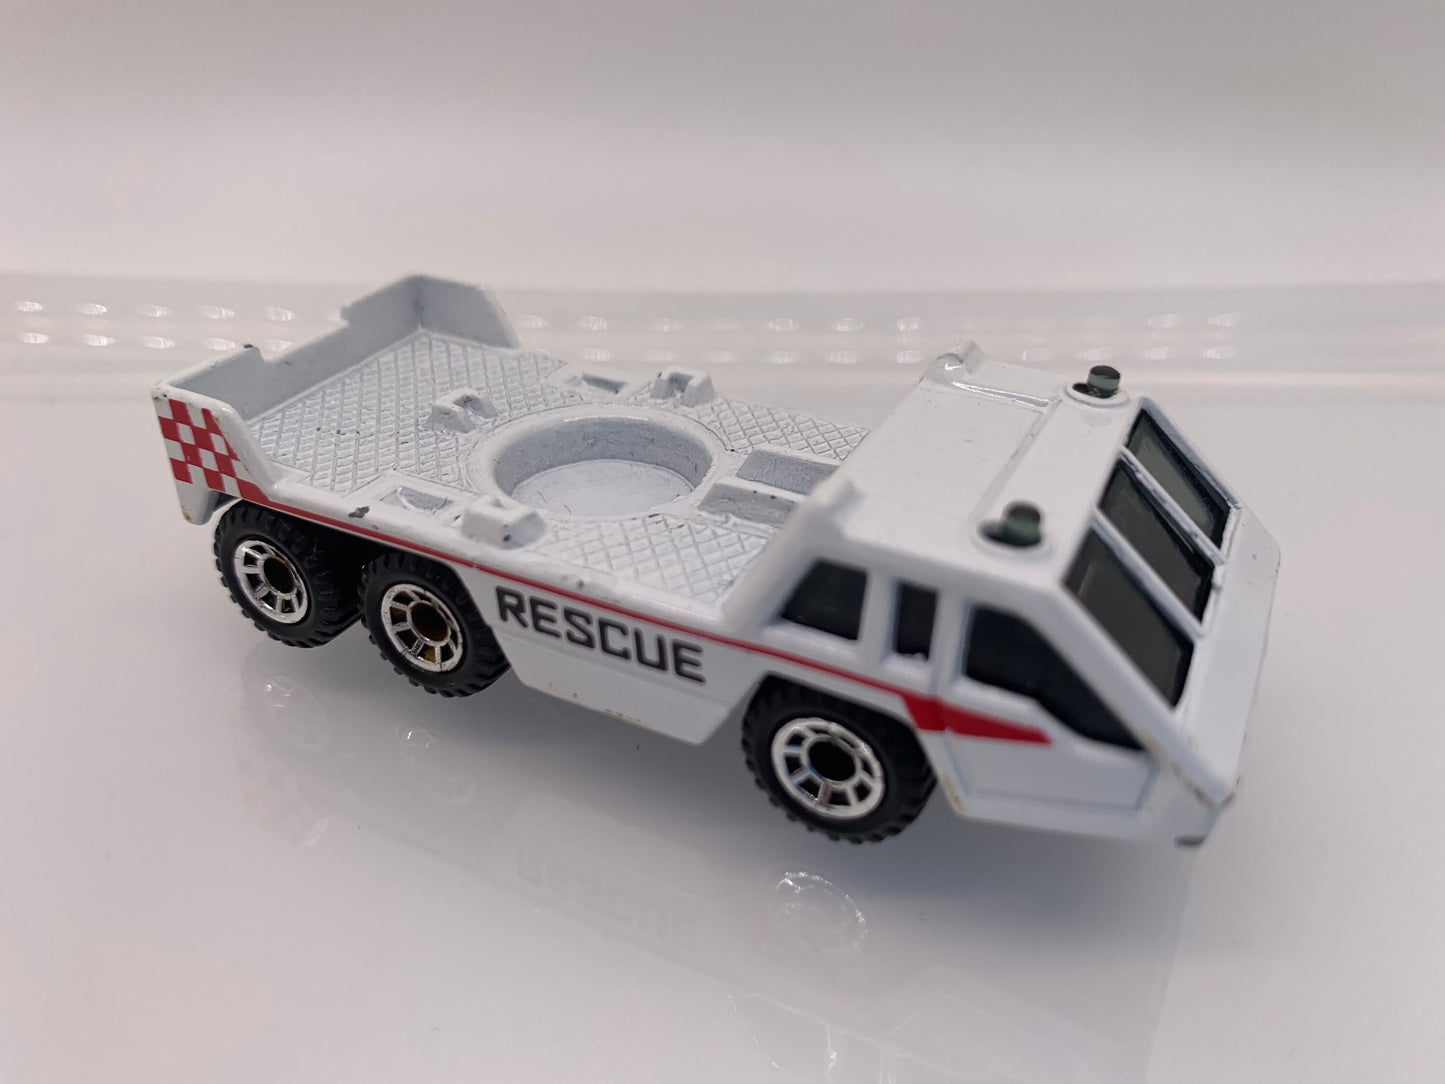 Matchbox Transporter Vehicle White Rescue Perfect Birthday Gift Miniature Collectable Model Toy Car